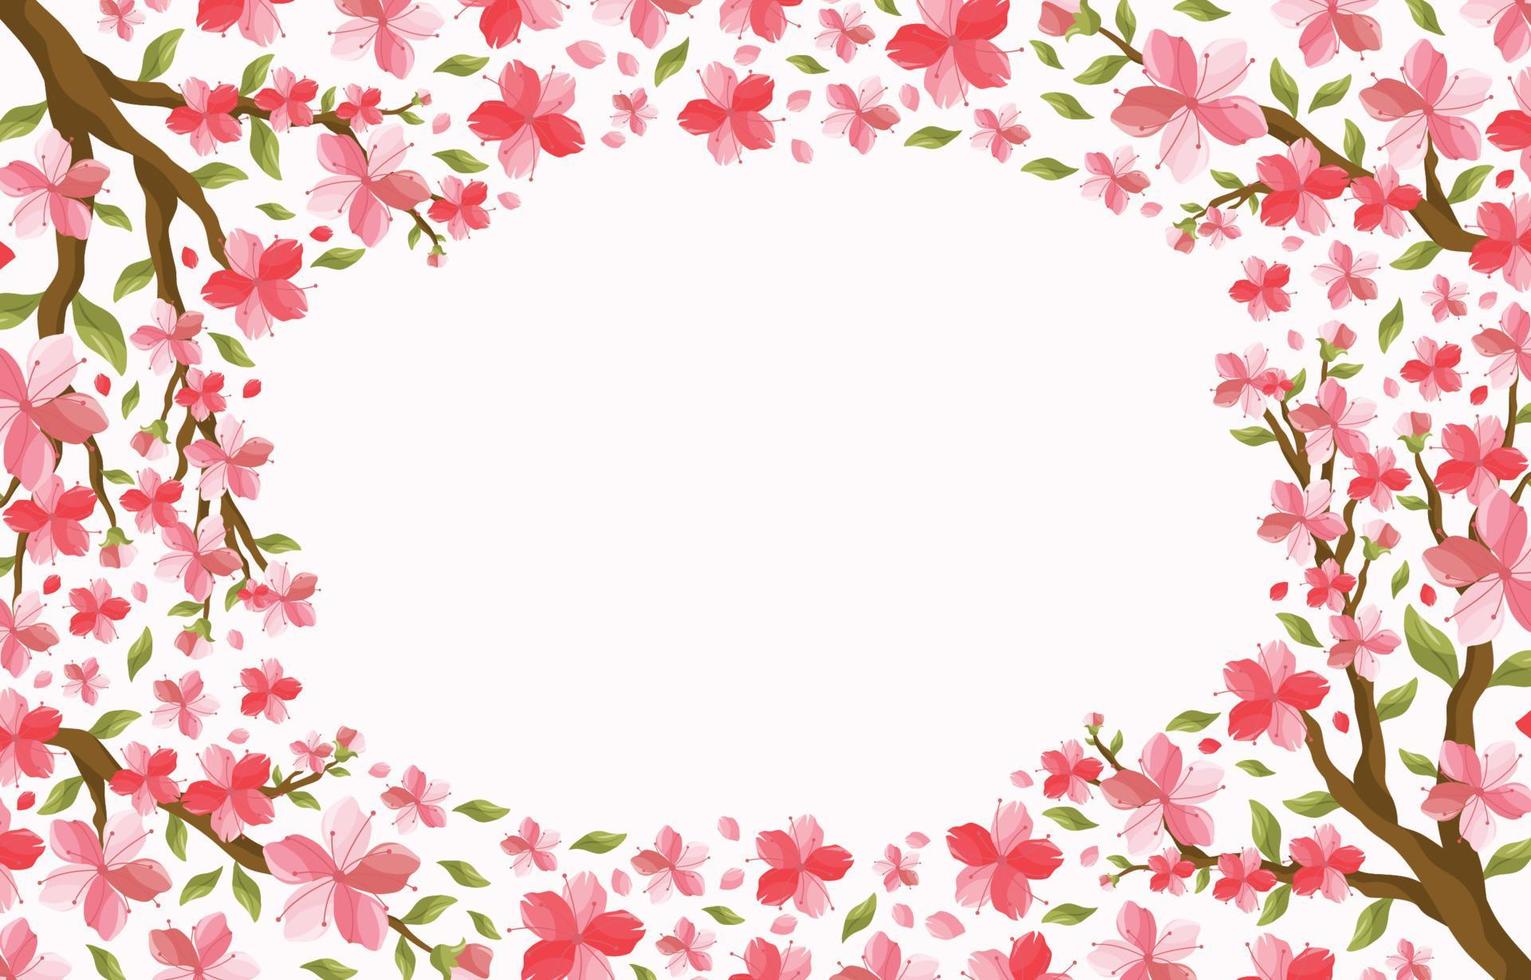 Peach Blossom Blooming Flower Background vector